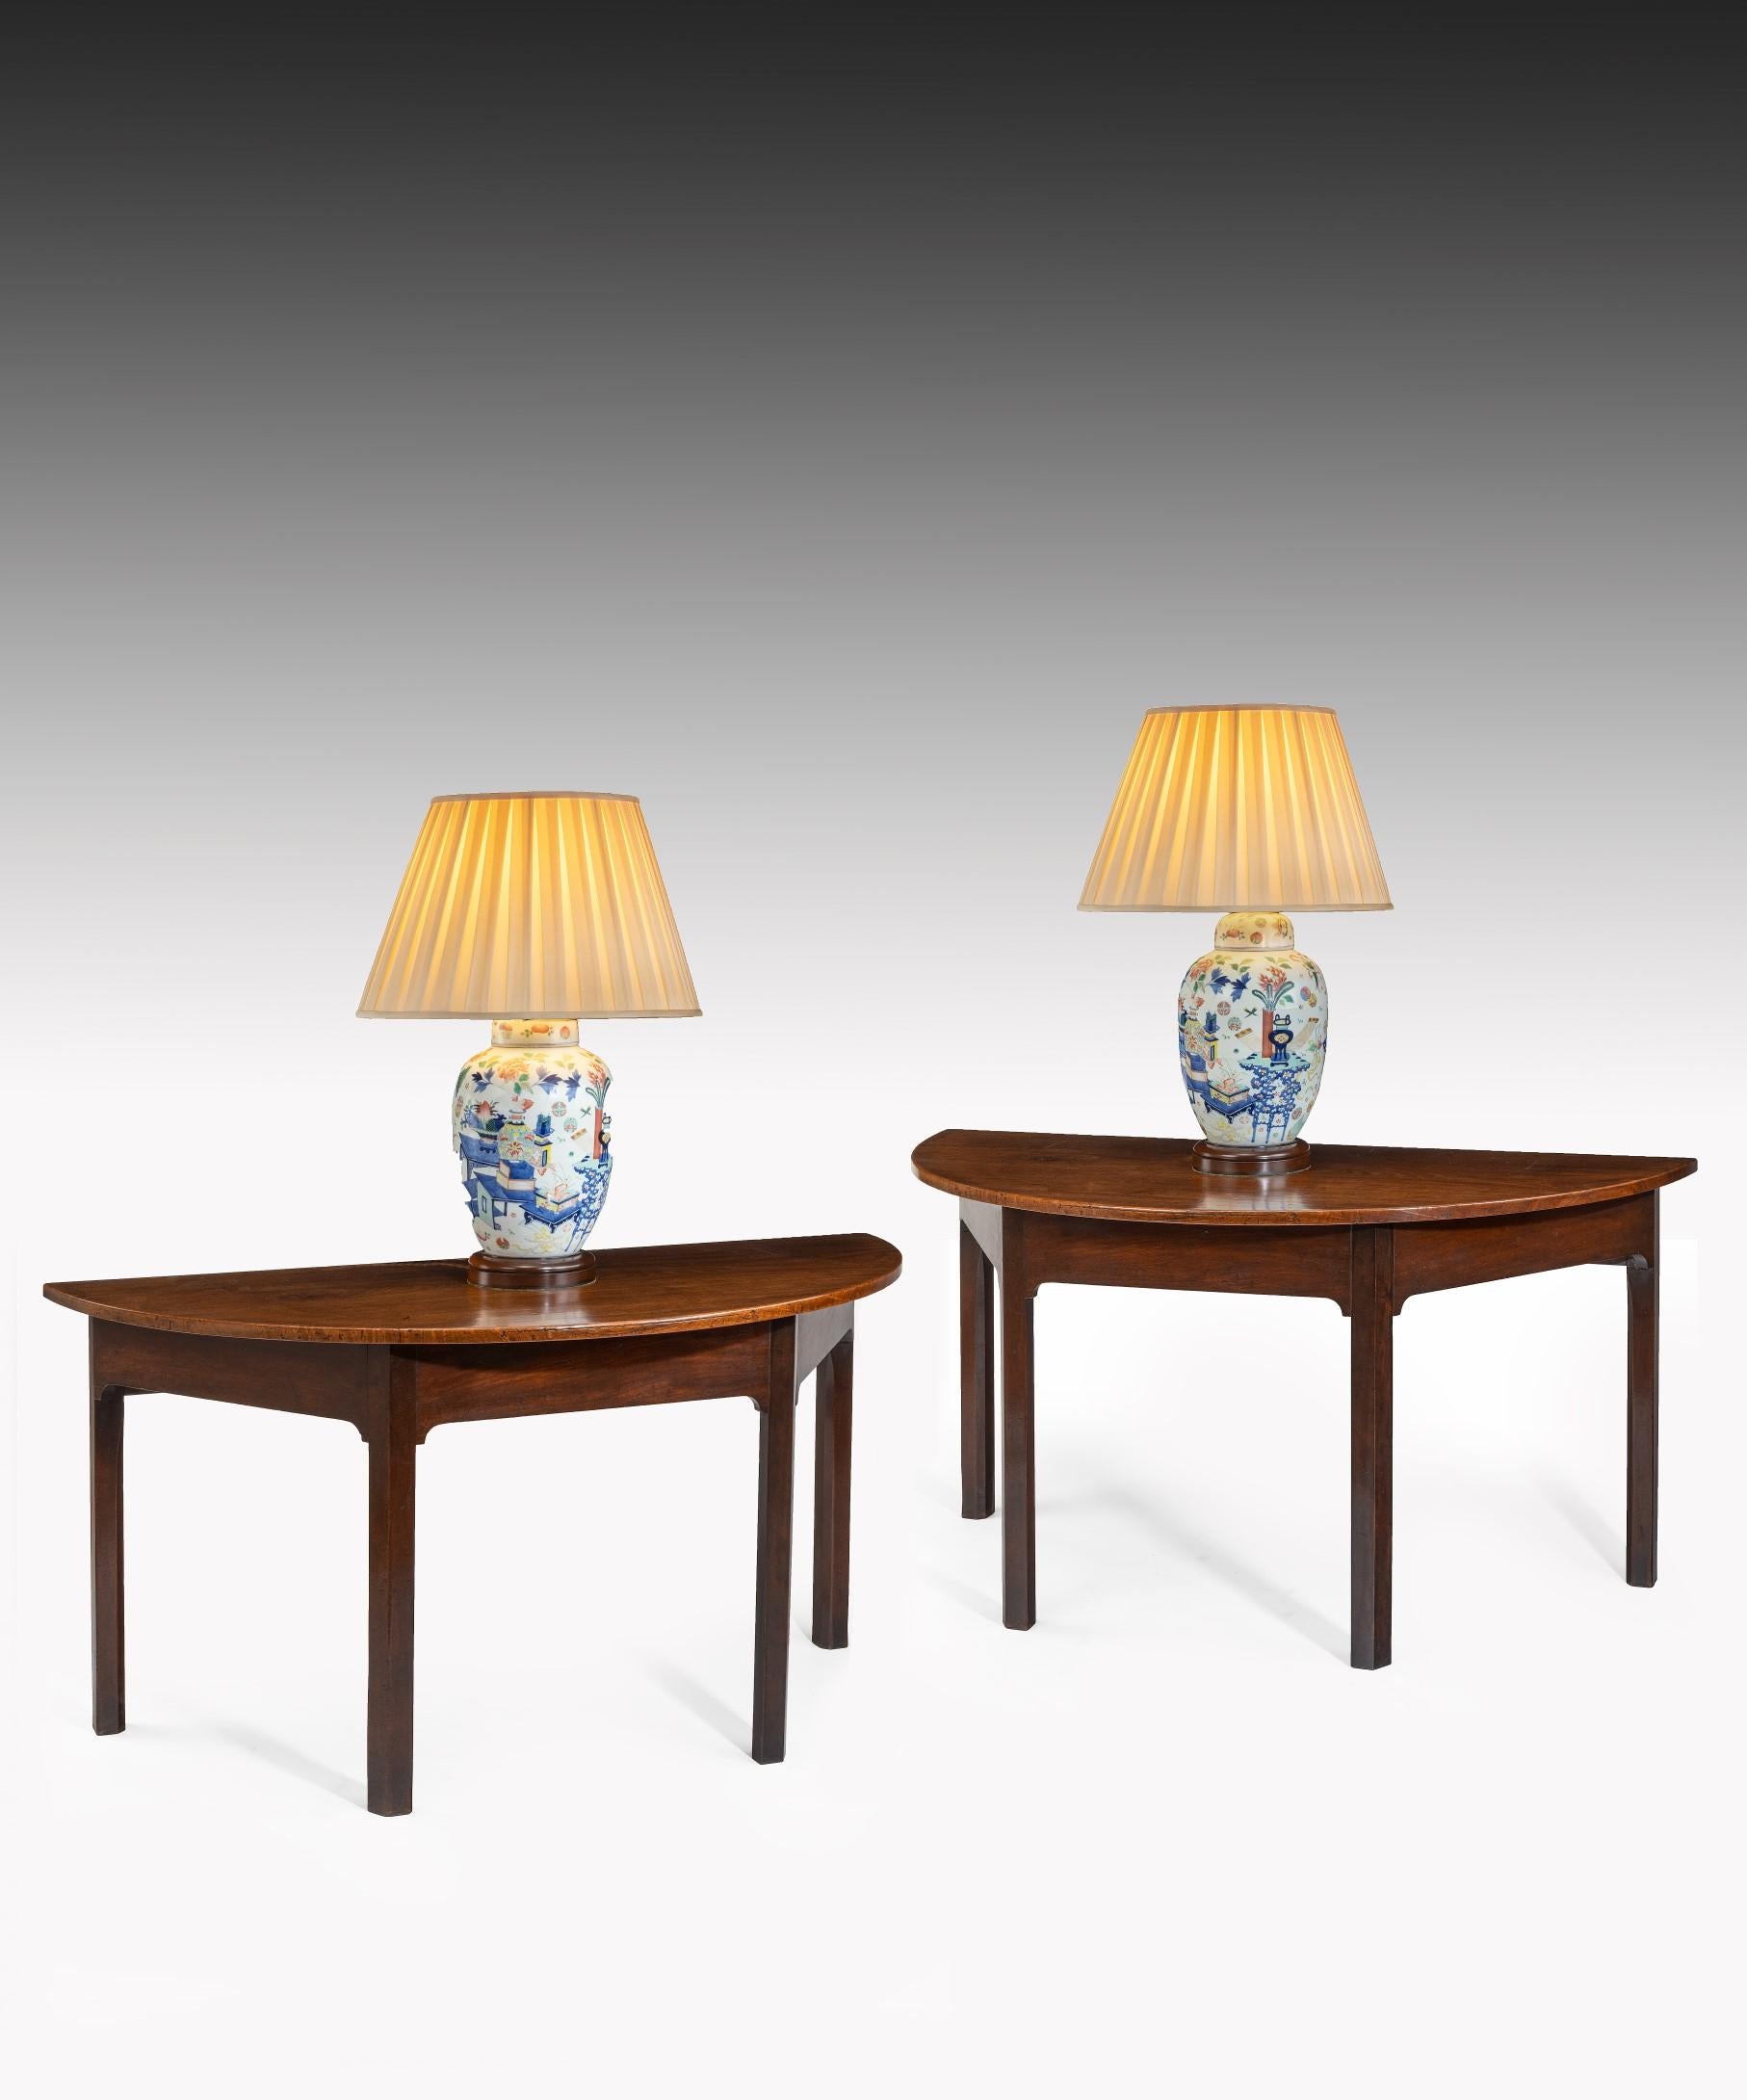 A handsome pair of George III Chippendale period mahogany demilune console tables; the well figured mahogany top above a crossgrain veneered frieze and raised on square moulded legs.

This pair of console tables were originally the D-ends of a